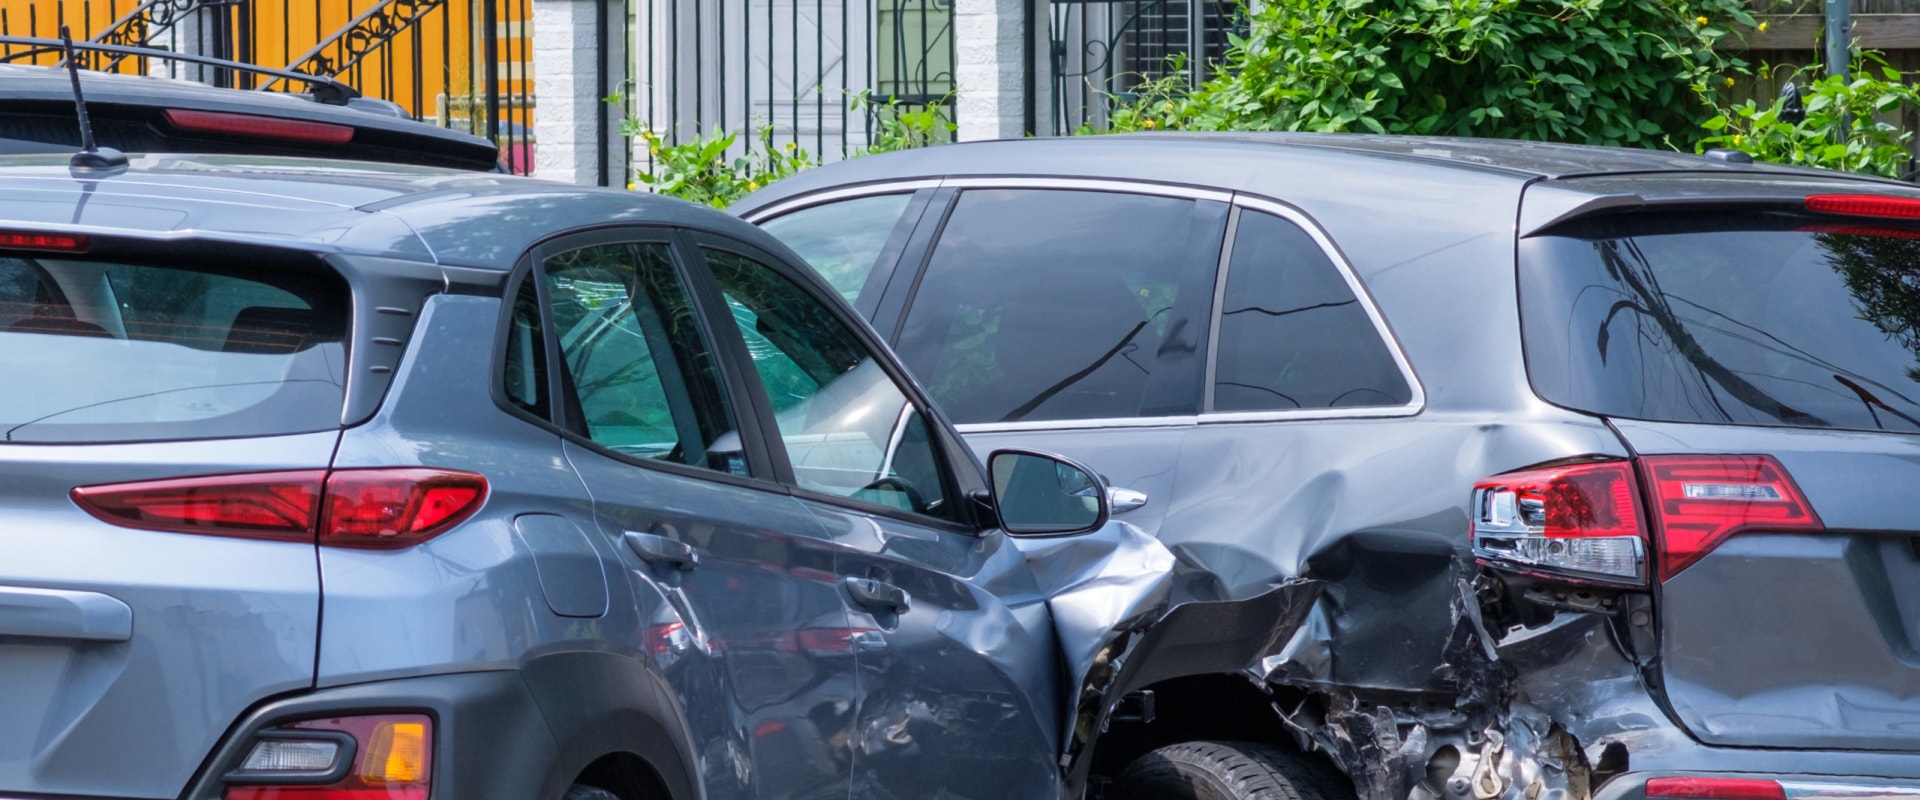 Expert Tips for Finding Qualified Attorneys for Auto Accidents in New Jersey